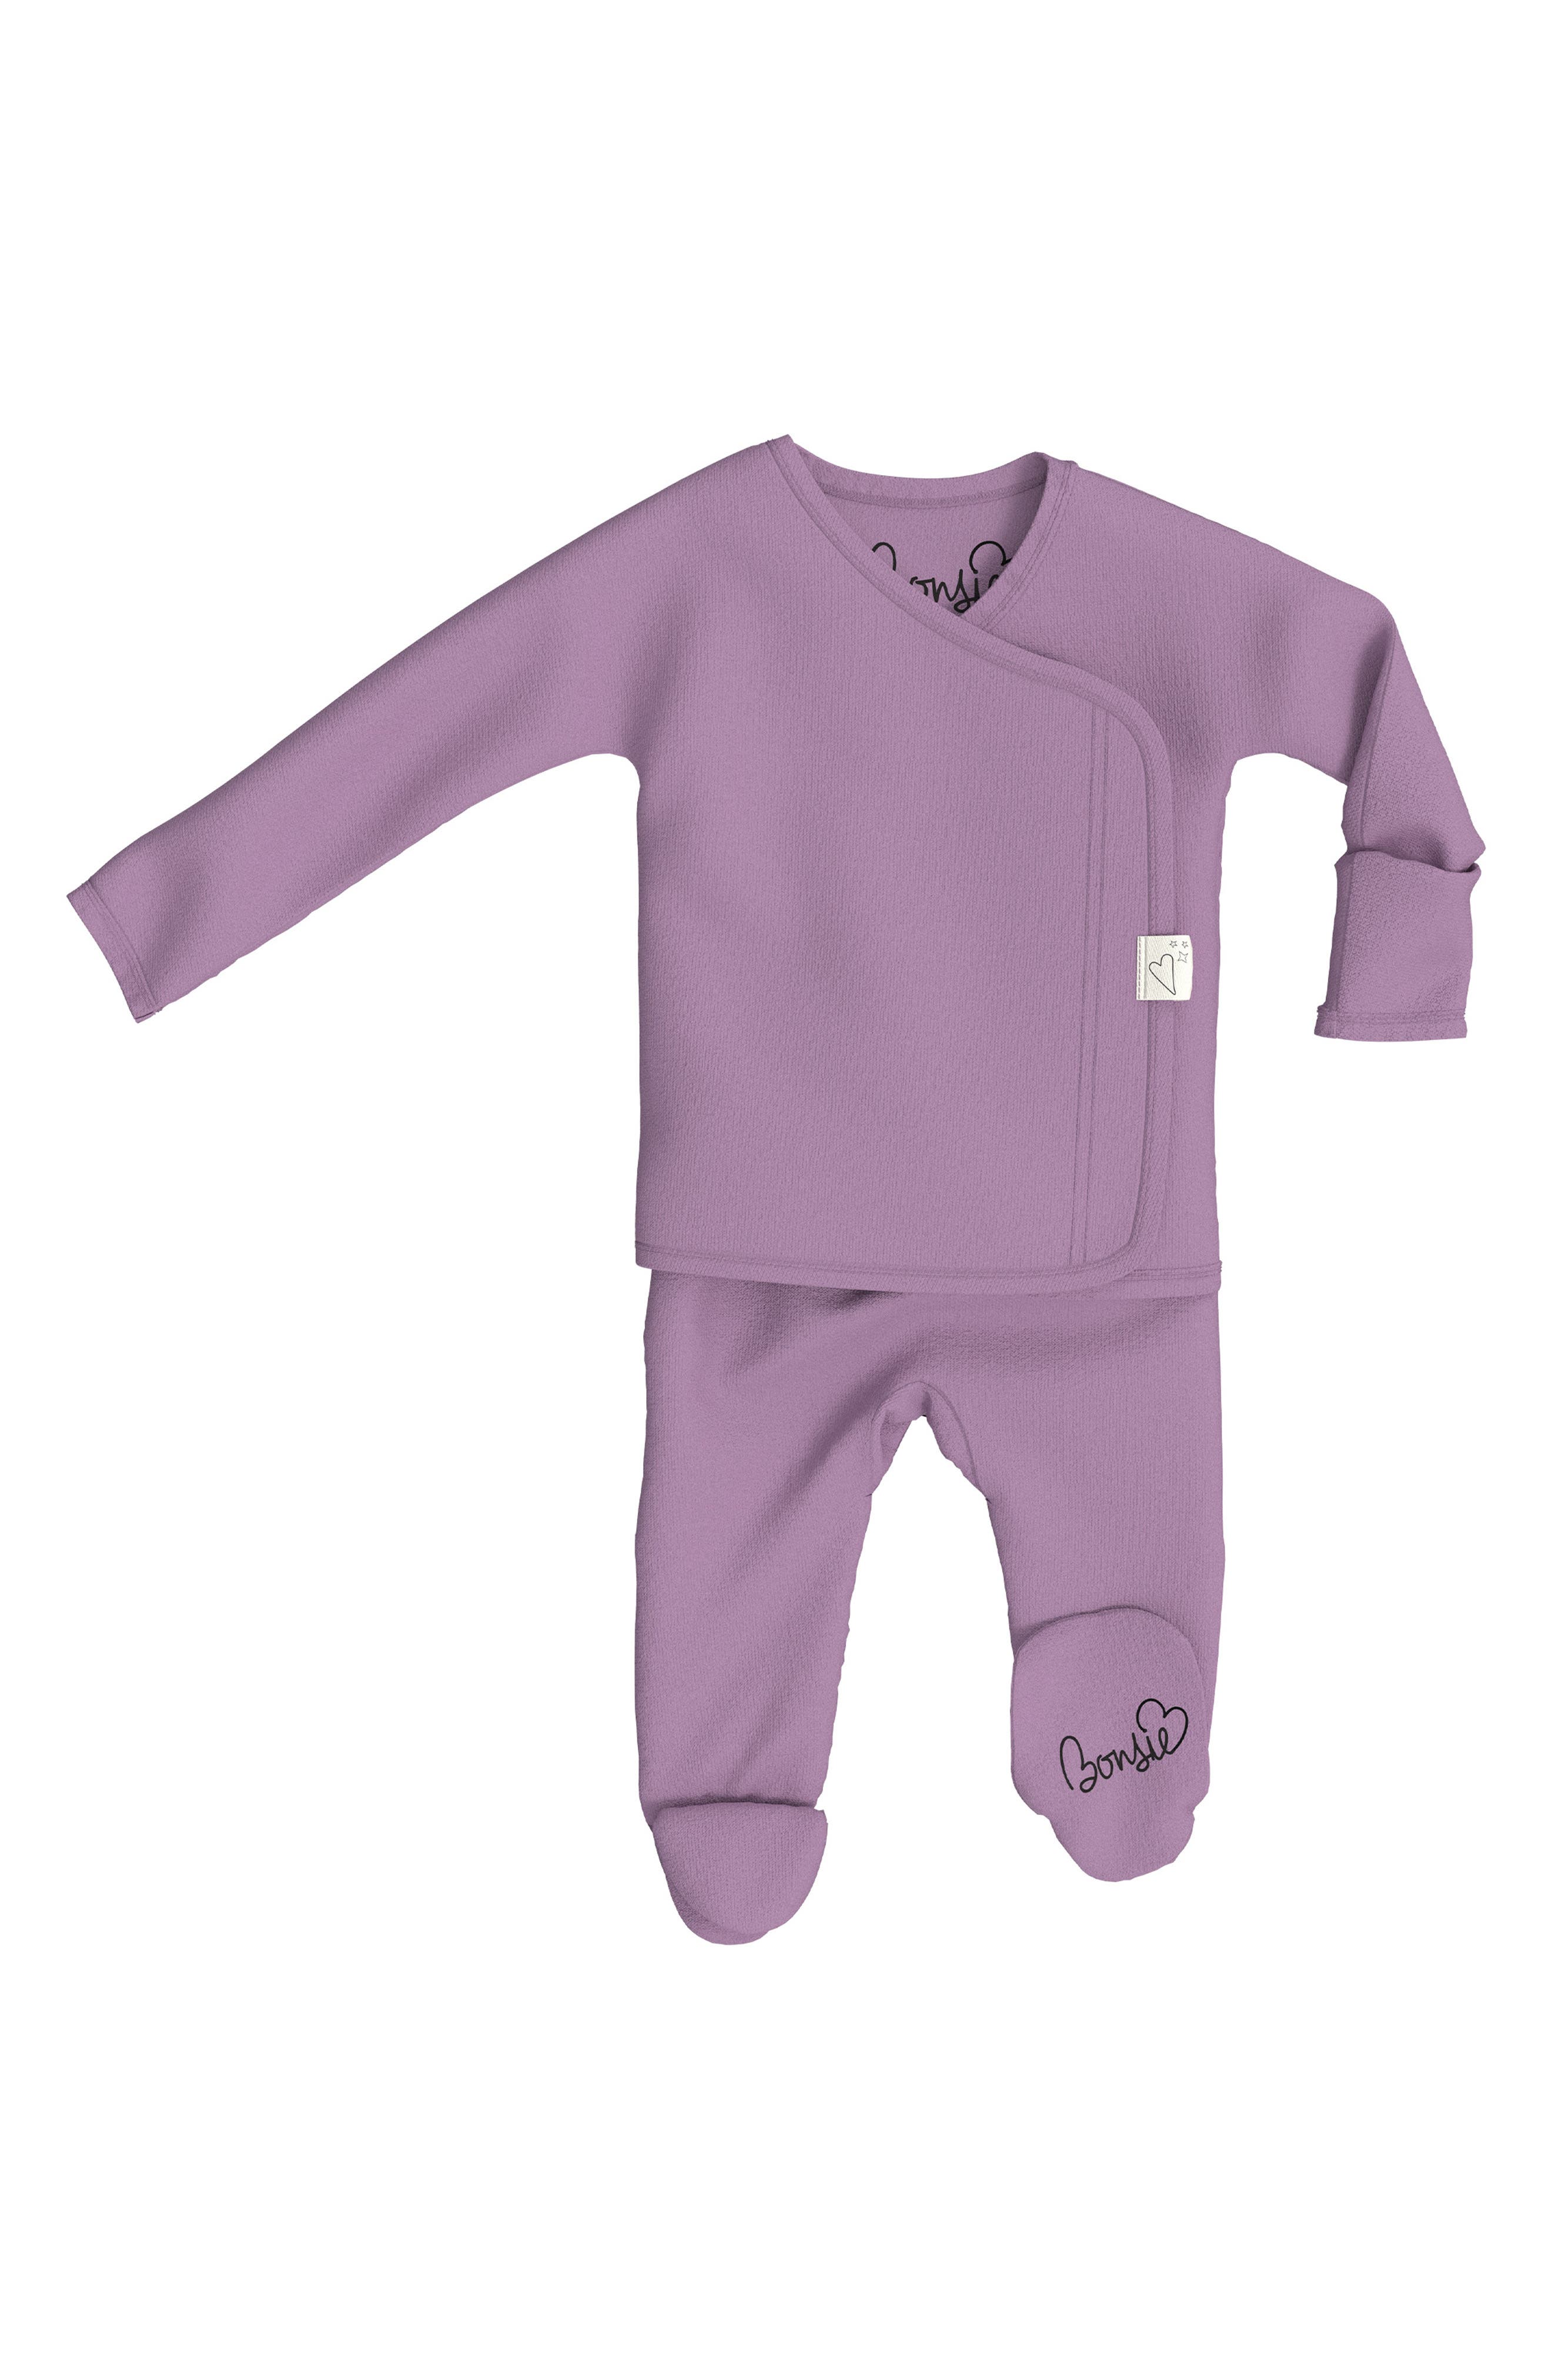 Footie in Marble Purple at Nordstrom Nordstrom Baby Clothing Outfit Sets Bodysuits & All-In-Ones 